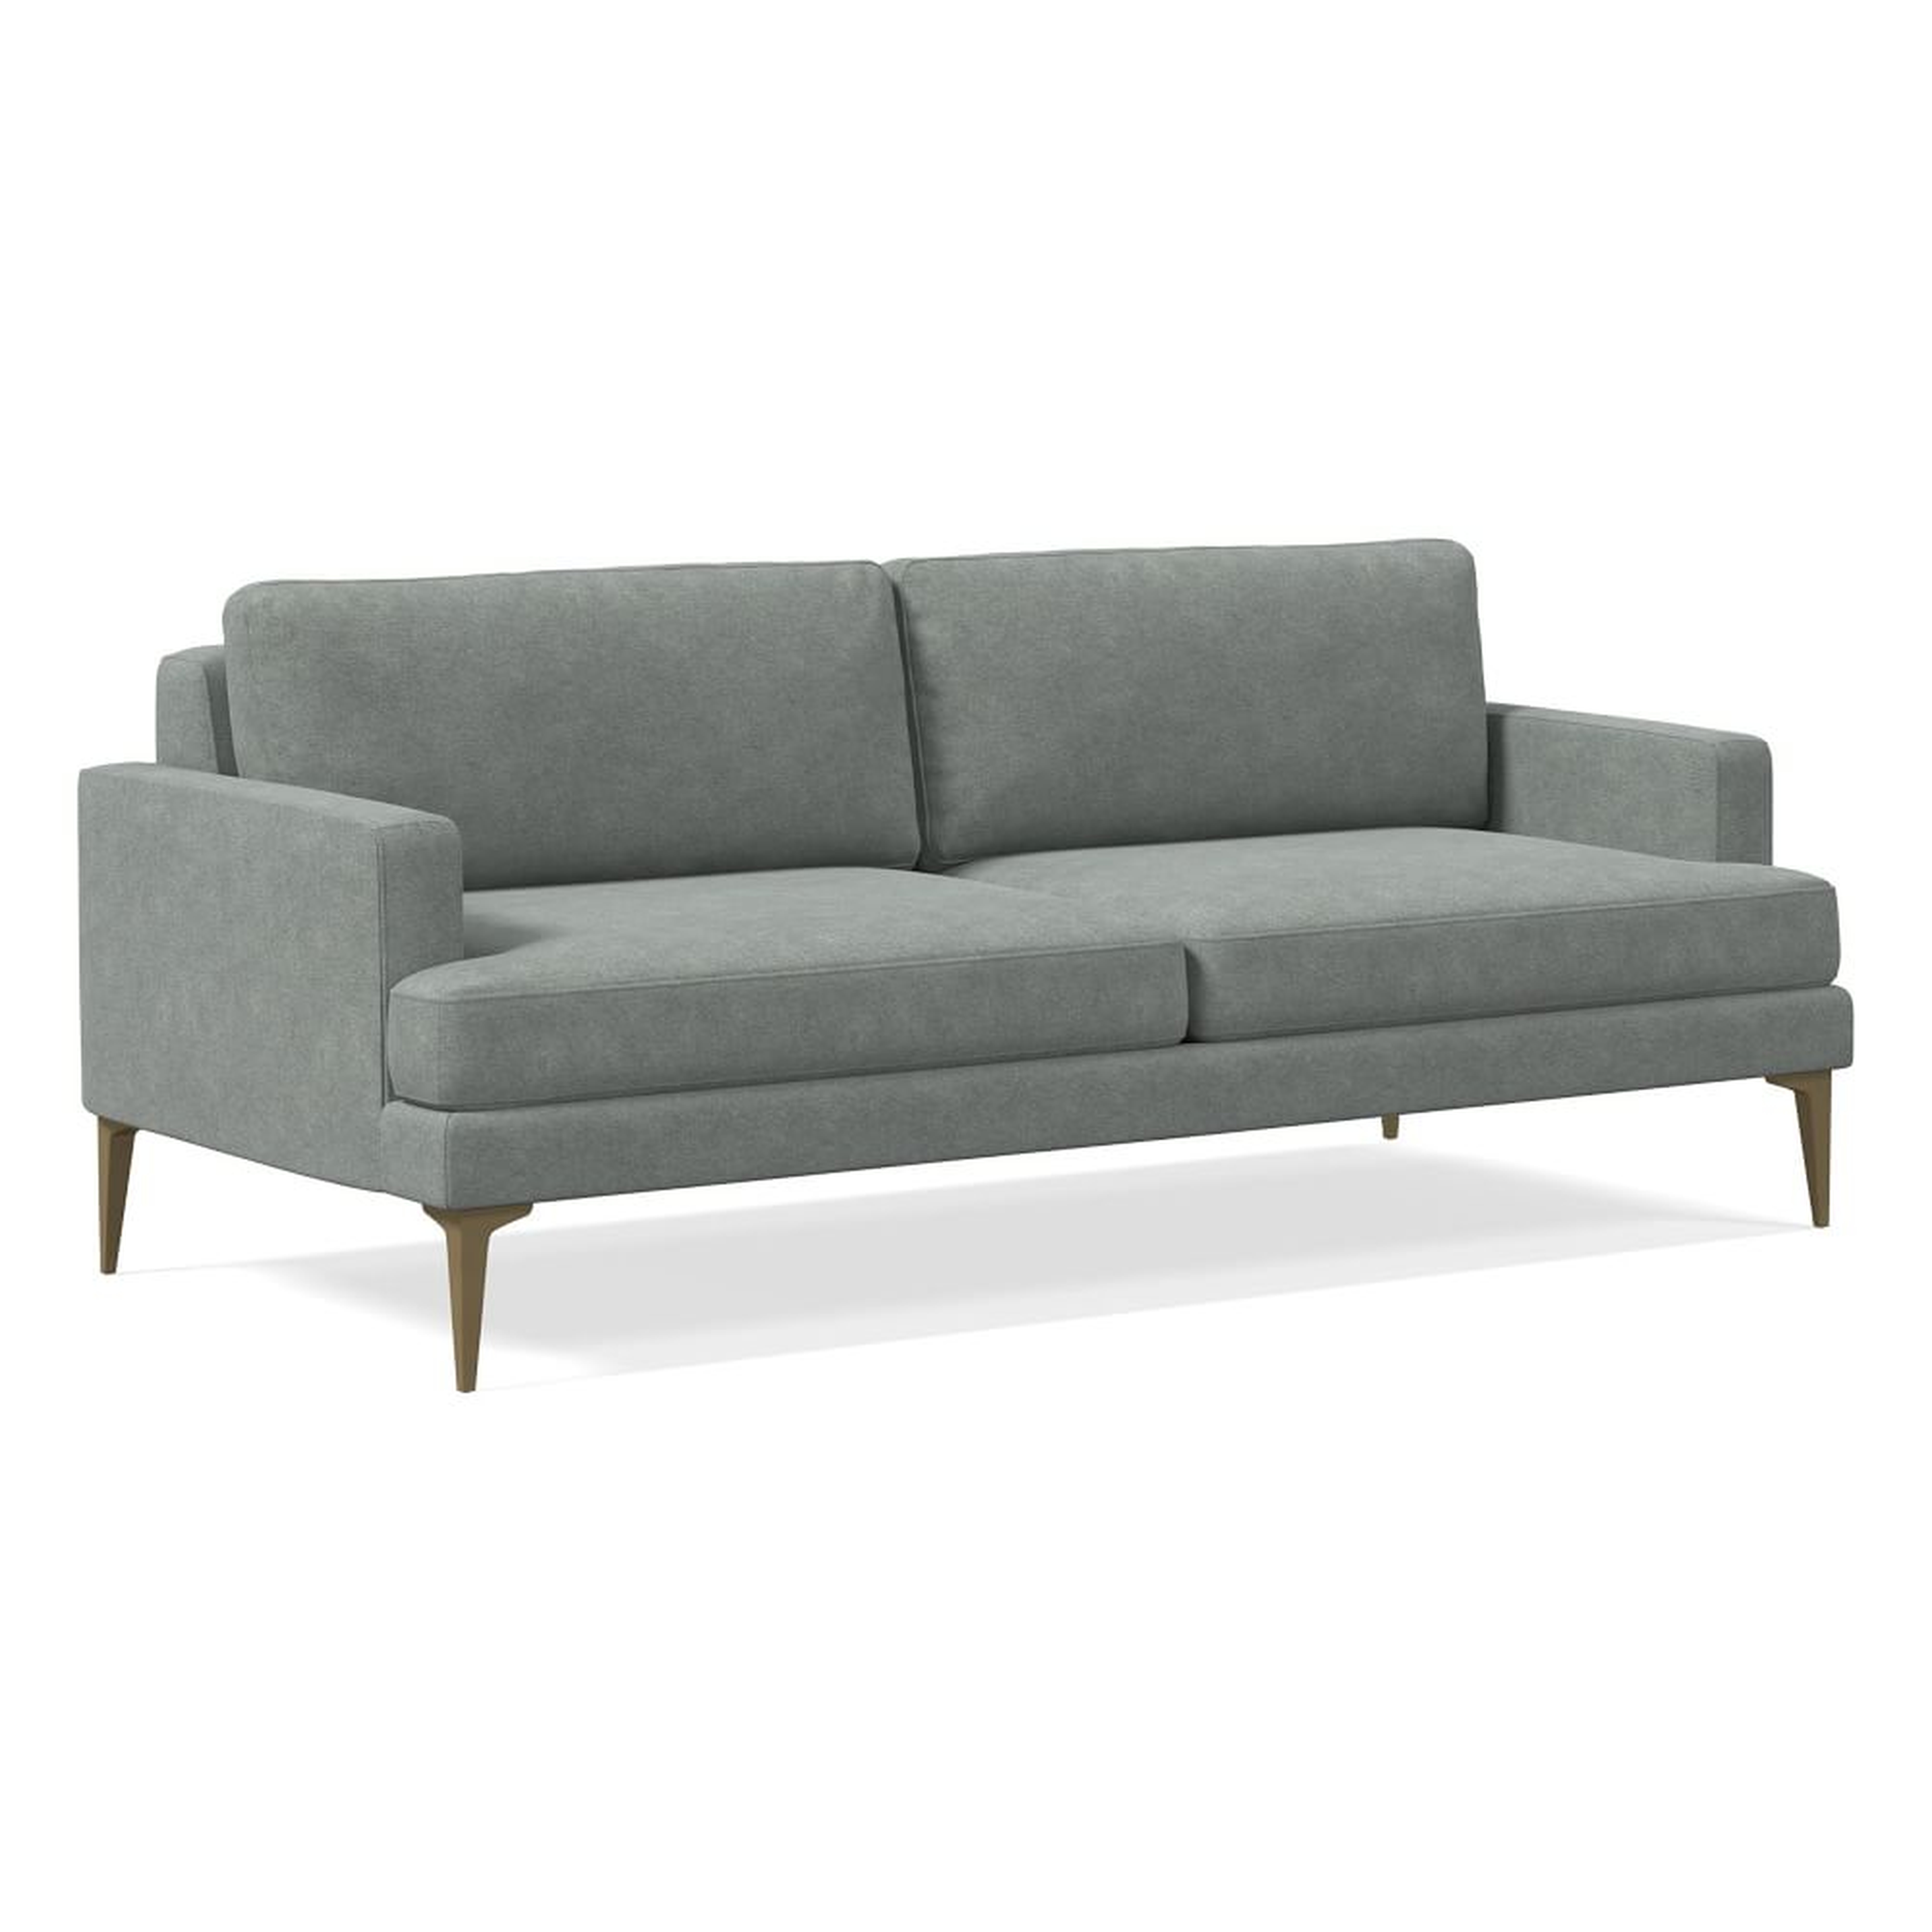 Andes Petite 76.5" Sofa, Poly, Distressed Velvet, Mineral Gray, Blackened Brass - West Elm